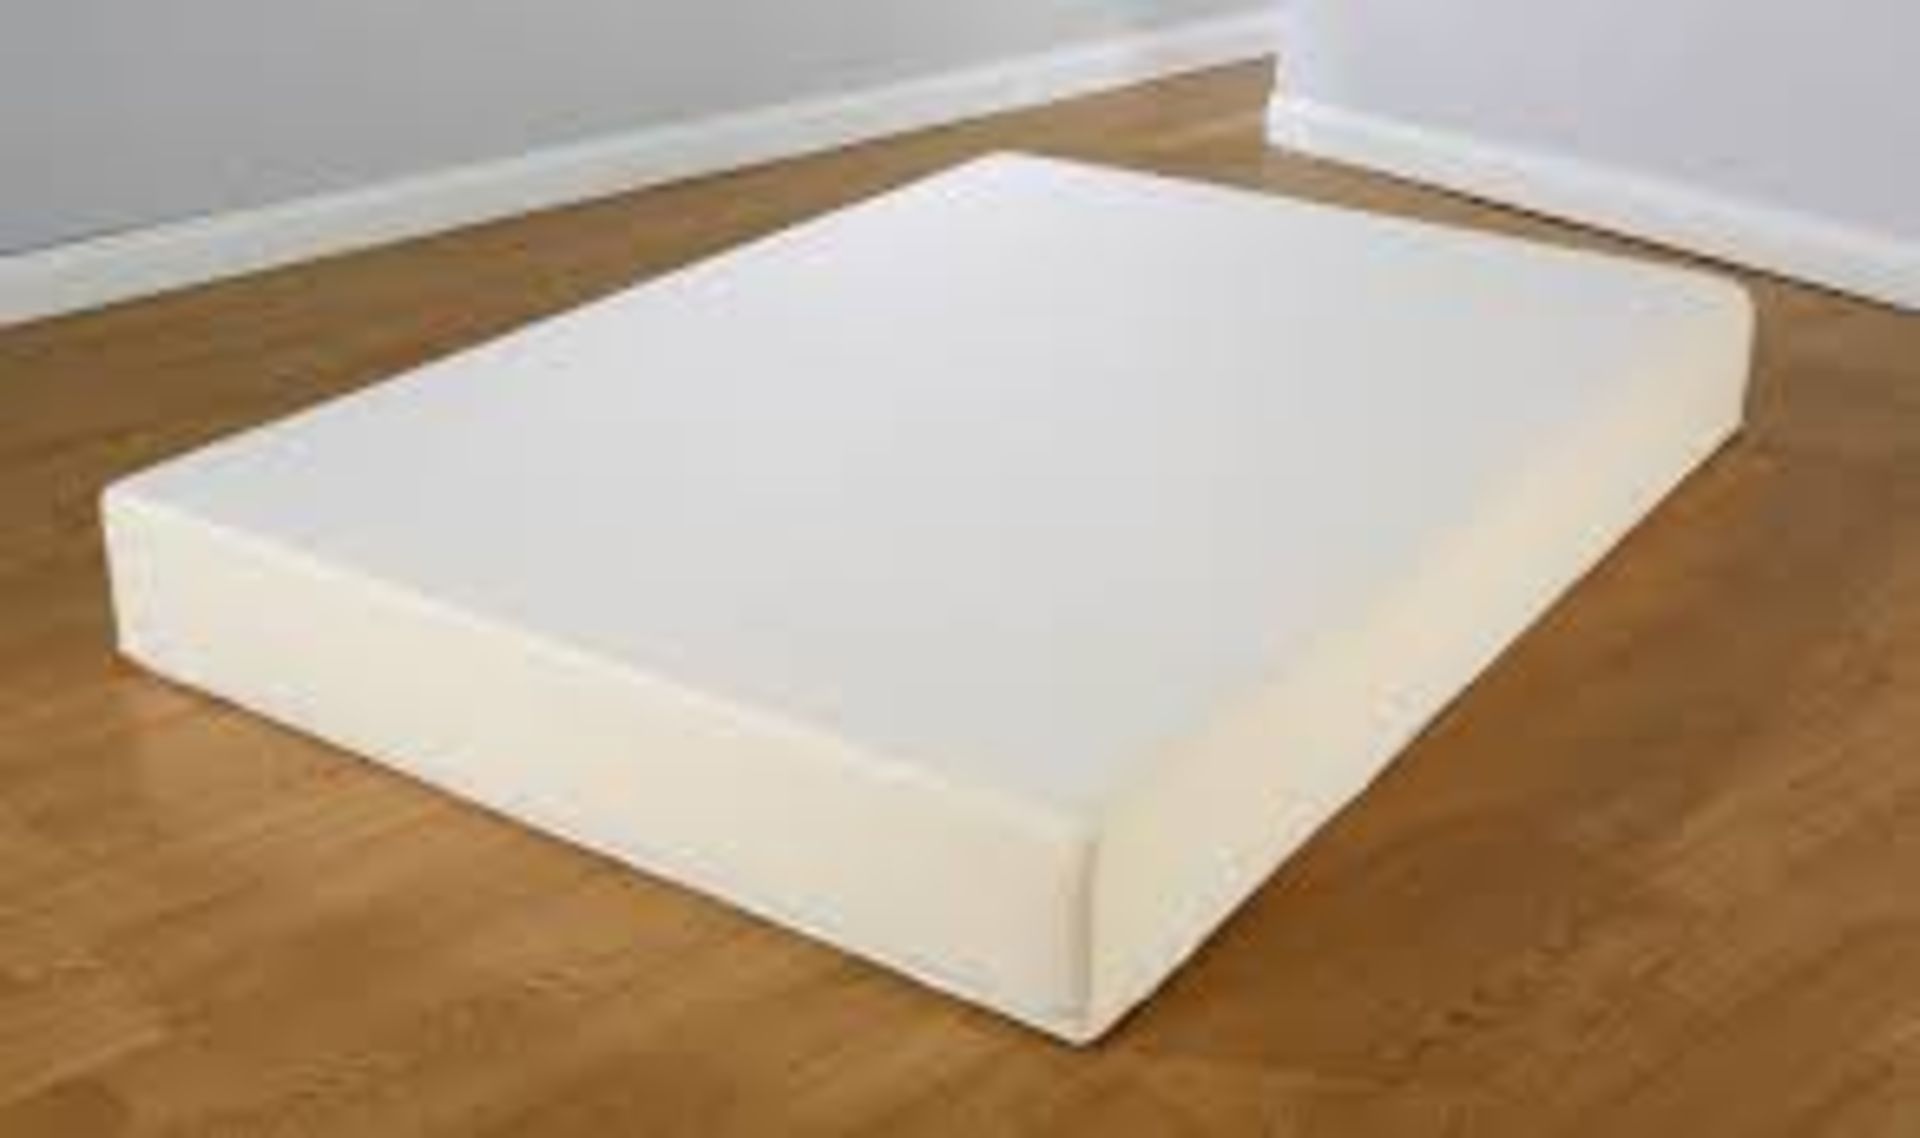 1 BRAND NEW BAGGED, ROLLED AND BOXED CASPIAN 3FT SINGLE MEMORY FOAM MATTRESS 18CM THICKNESS